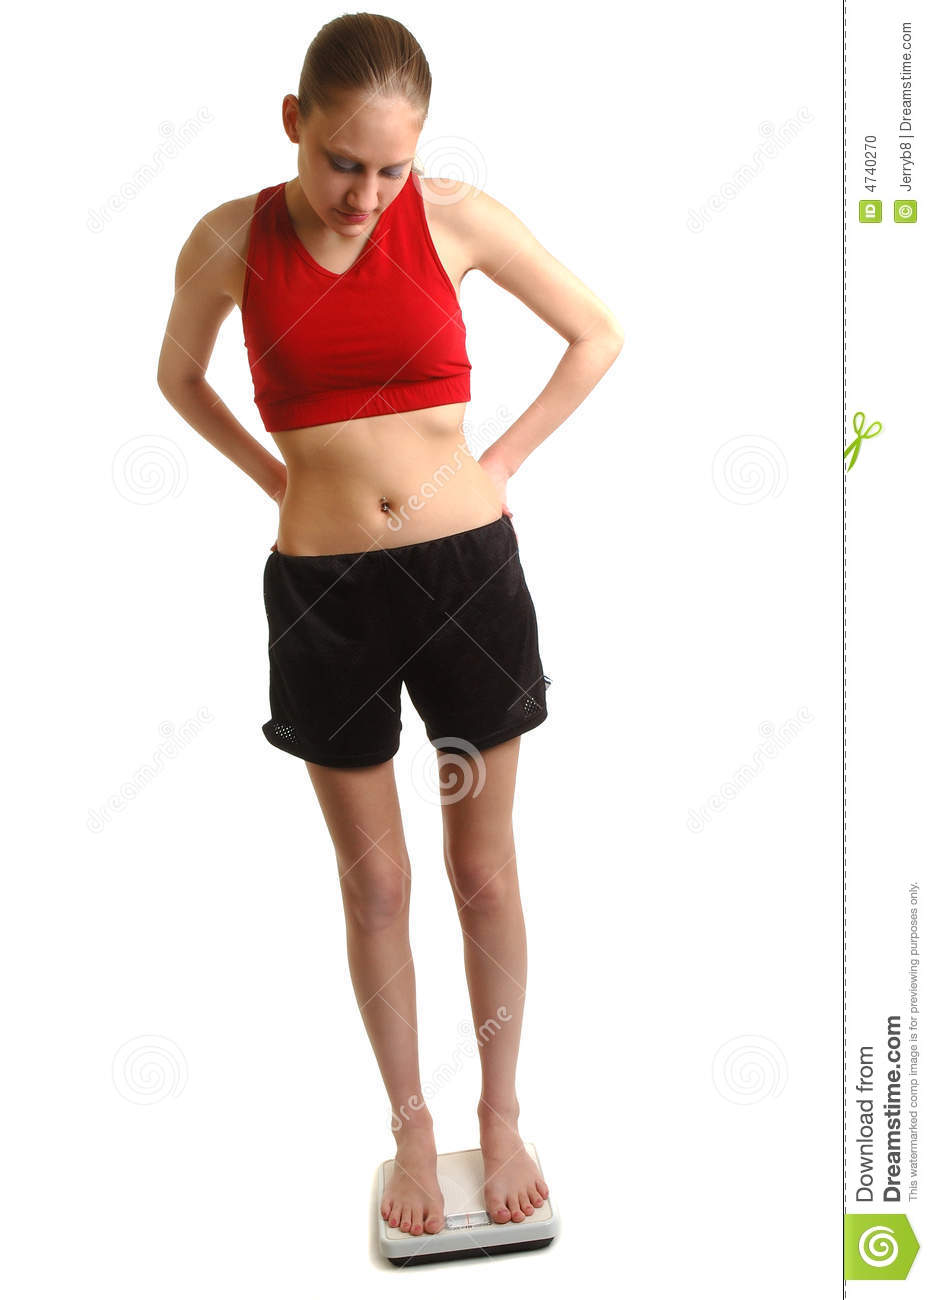 More Similar Stock Images Of   Girl Weighing Herself  